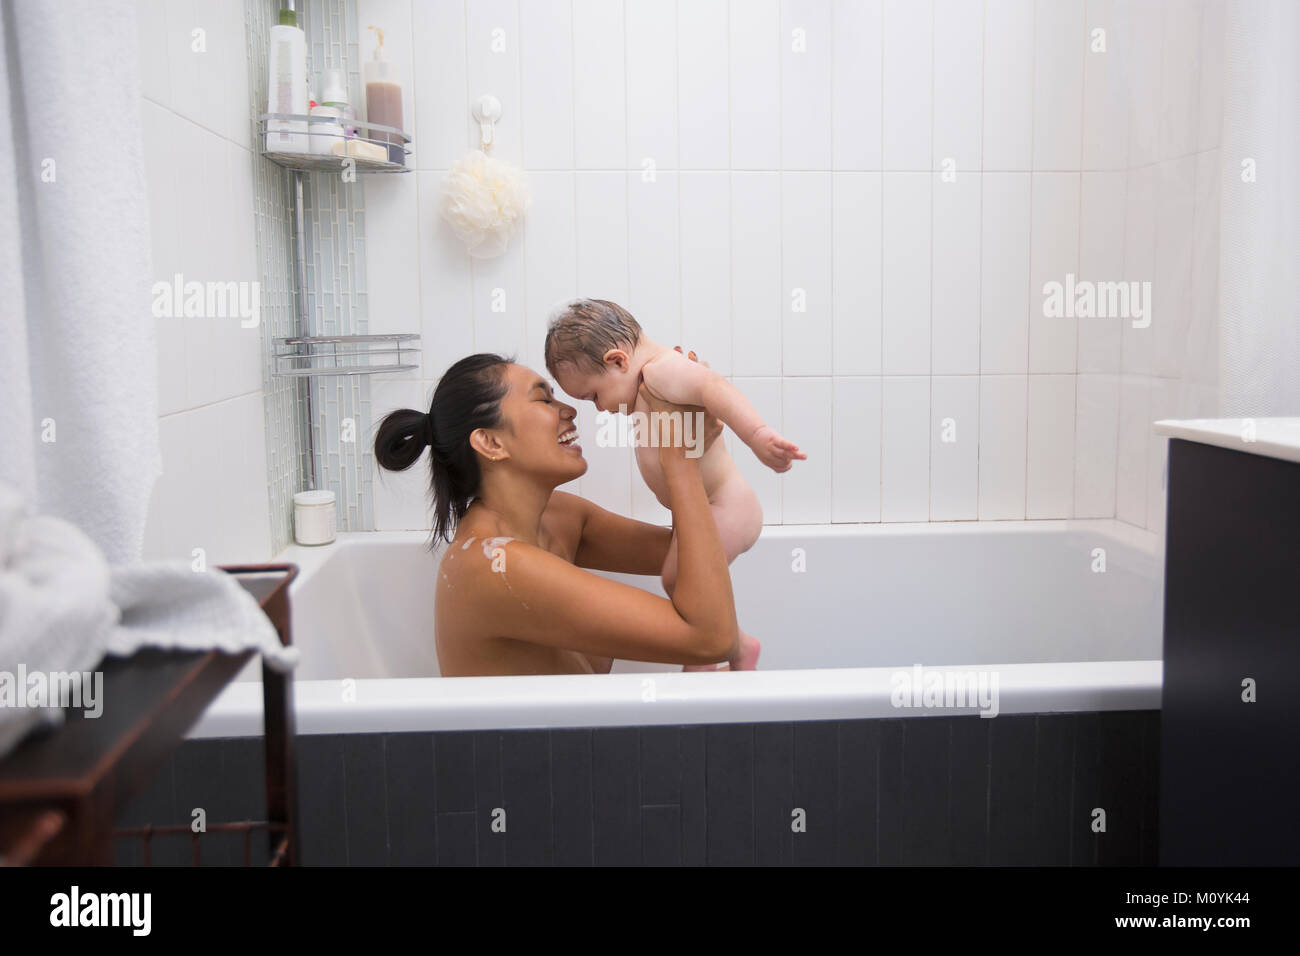 Mother sitting in bathtub holding baby son Stock Photo